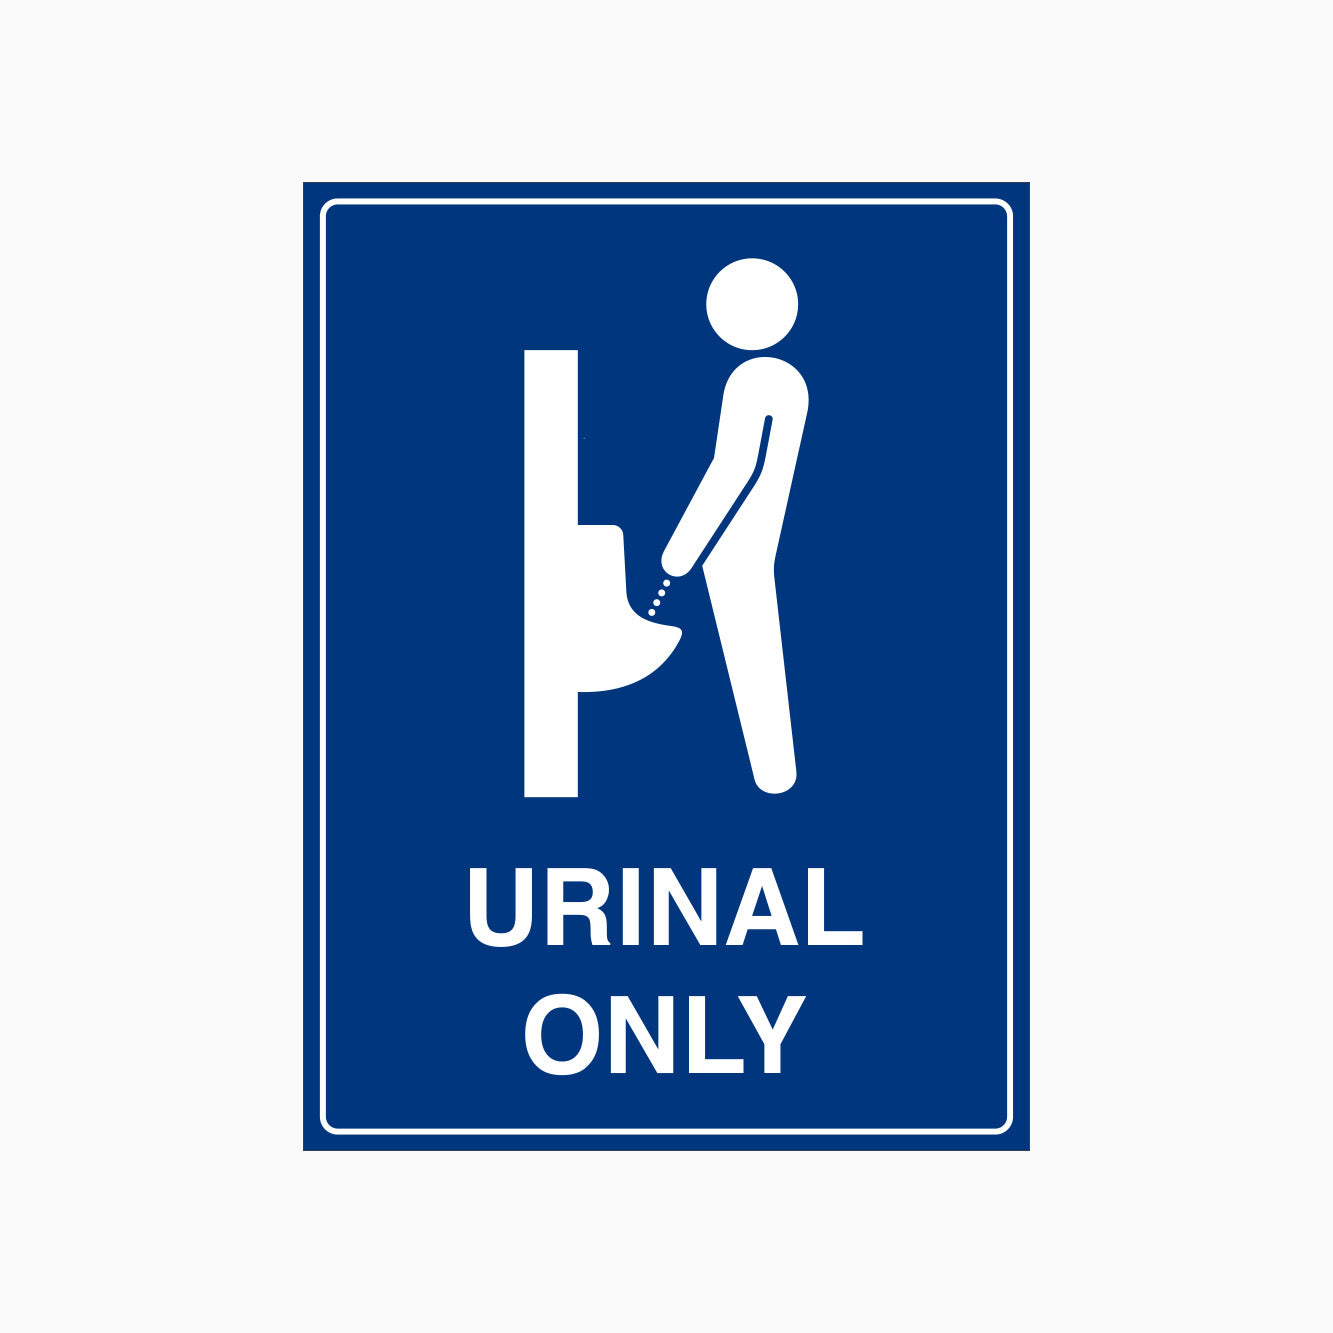 URINAL ONLY SIGN